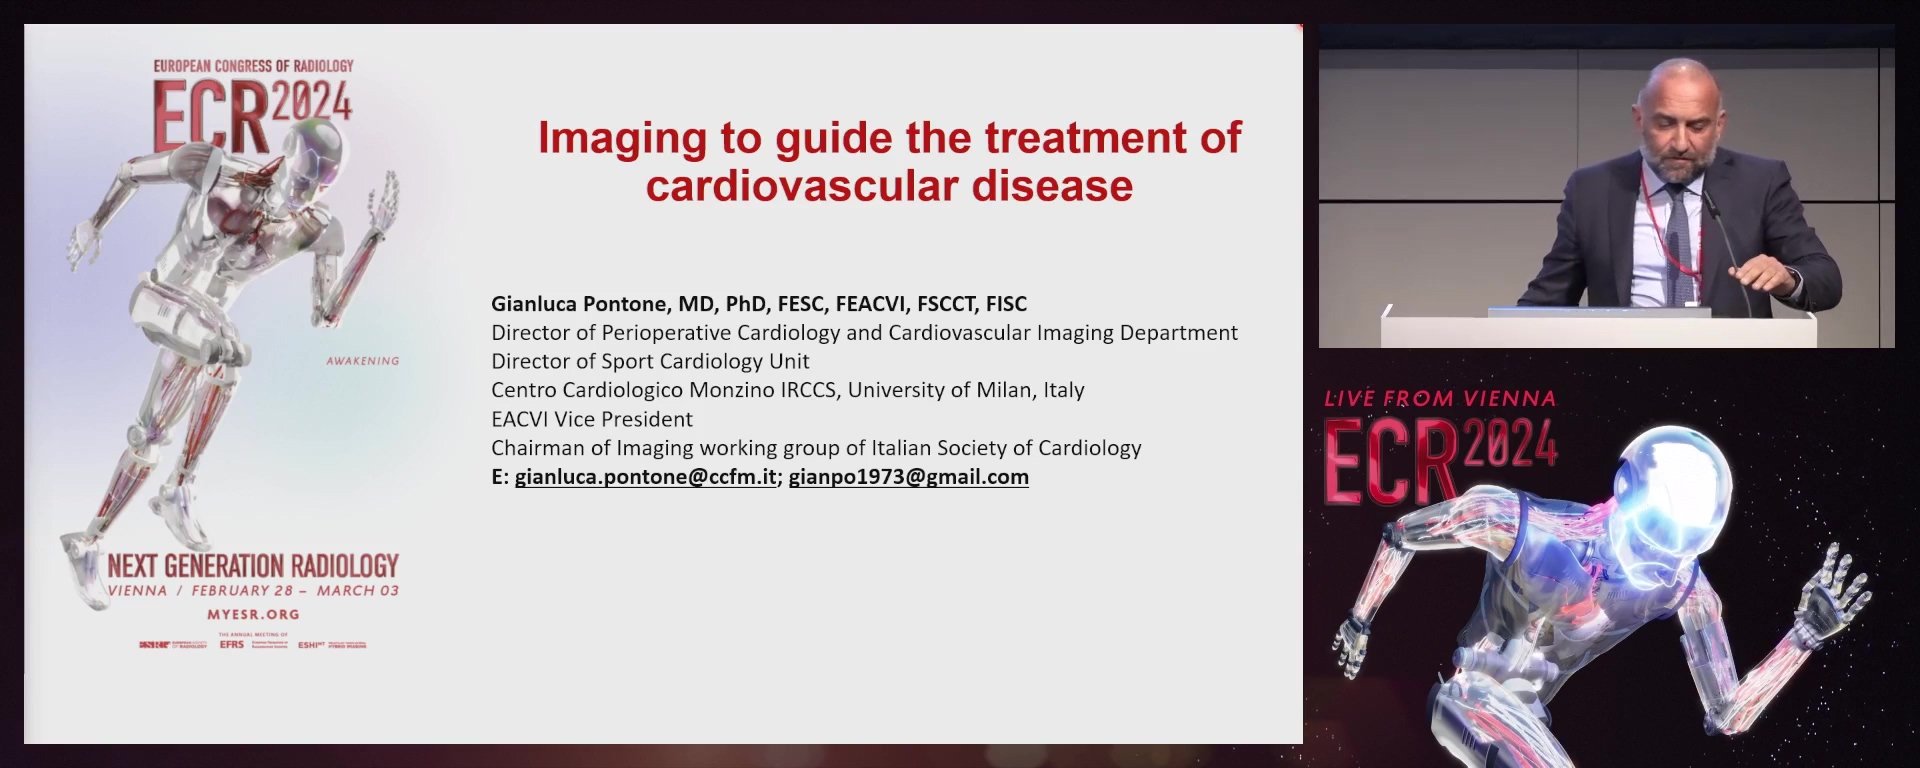 Imaging to guide treatment: from revascularization to structural heart disease.